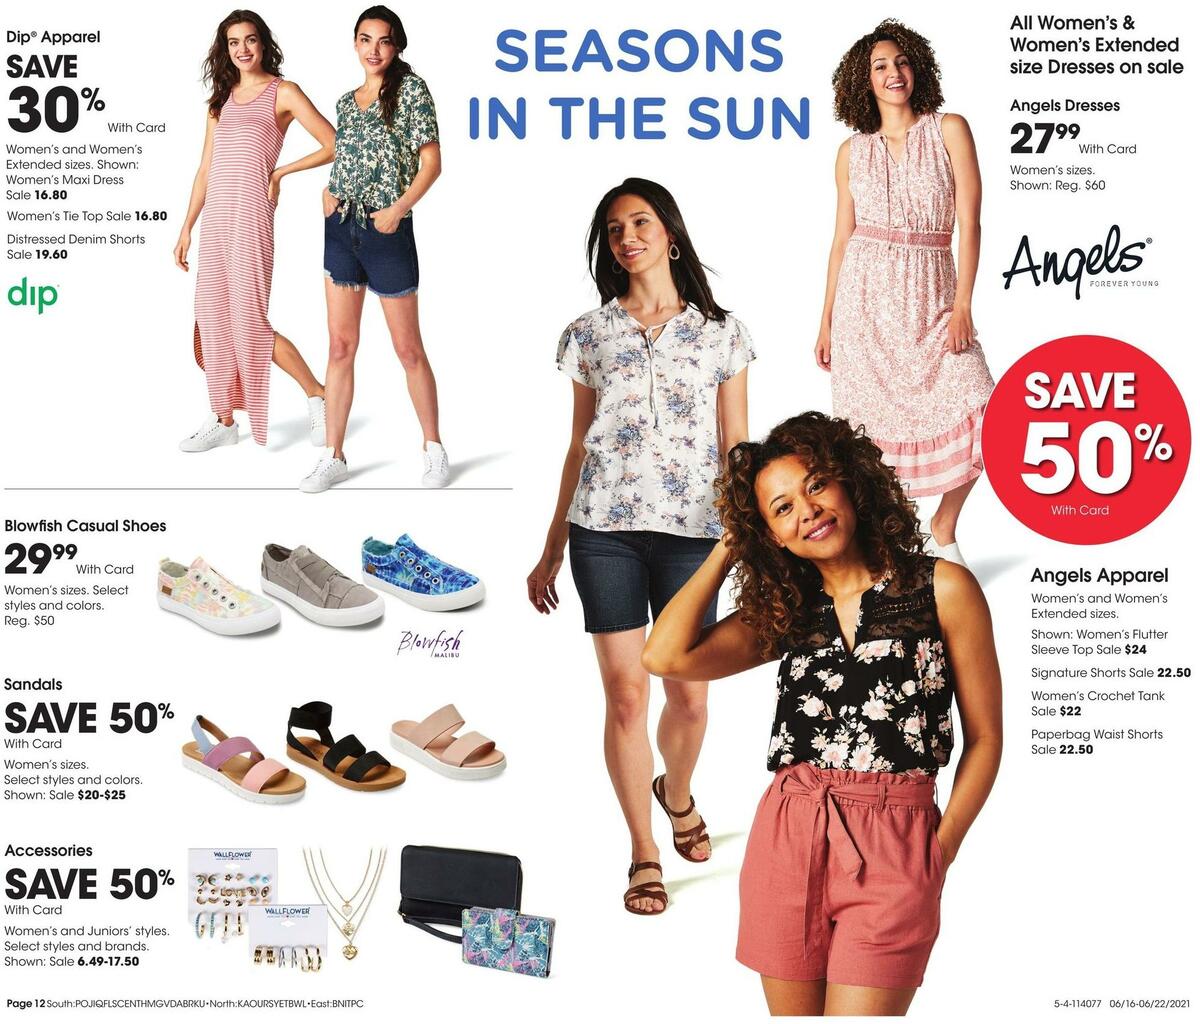 Fred Meyer General Merchandise Weekly Ad from June 16